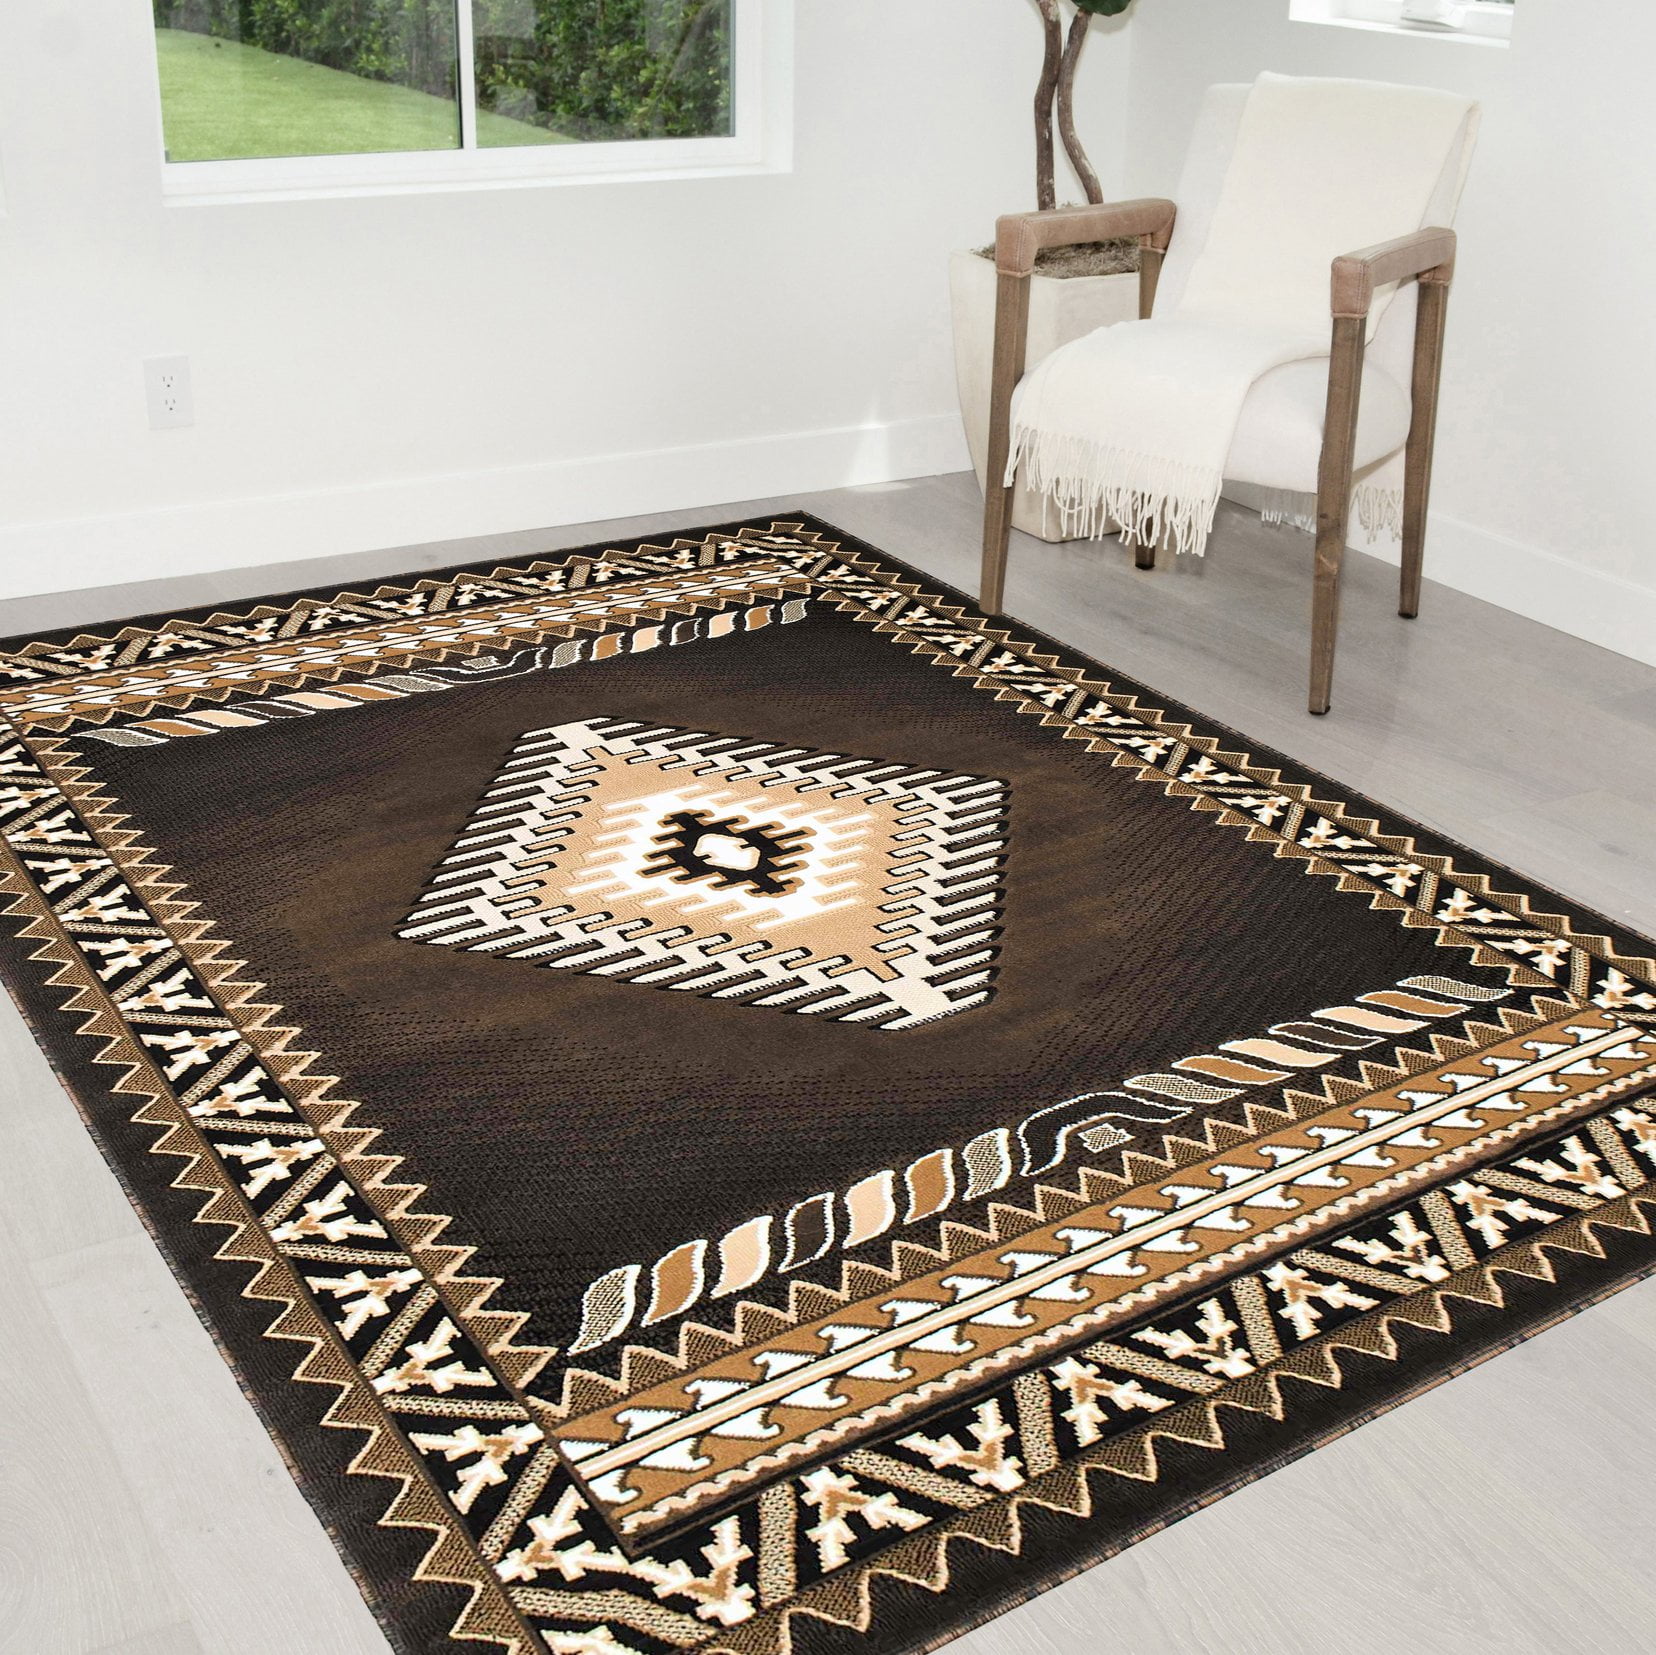 Rugs For Every Home - Modern, Traditional, Custom Styles